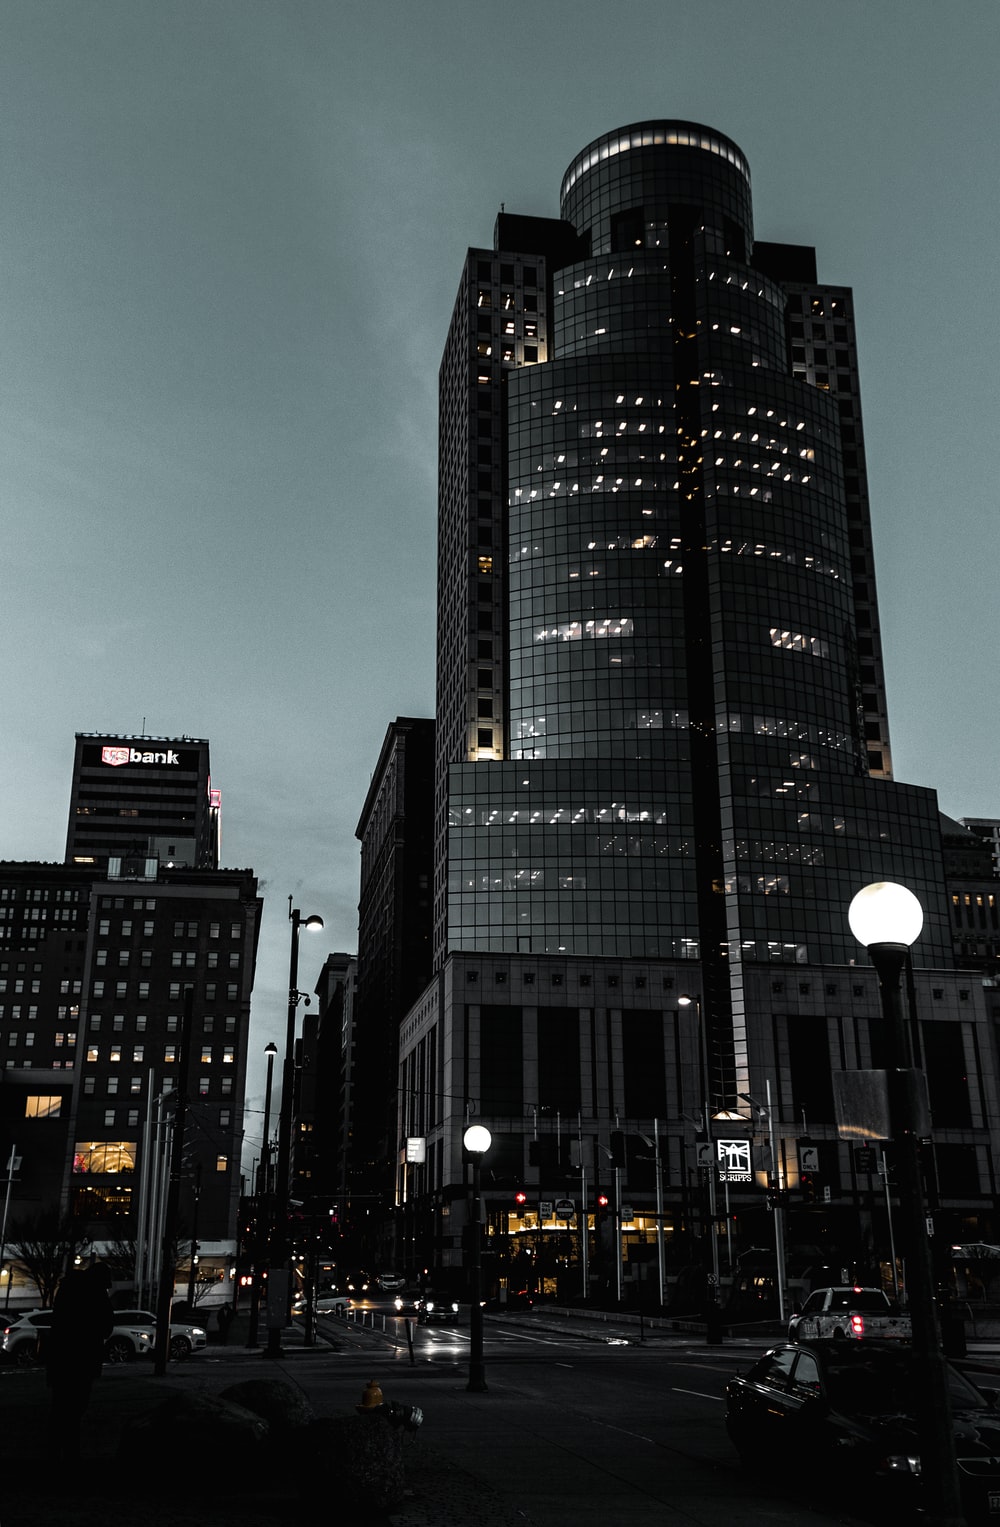 Dark Building Picture. Download Free Image